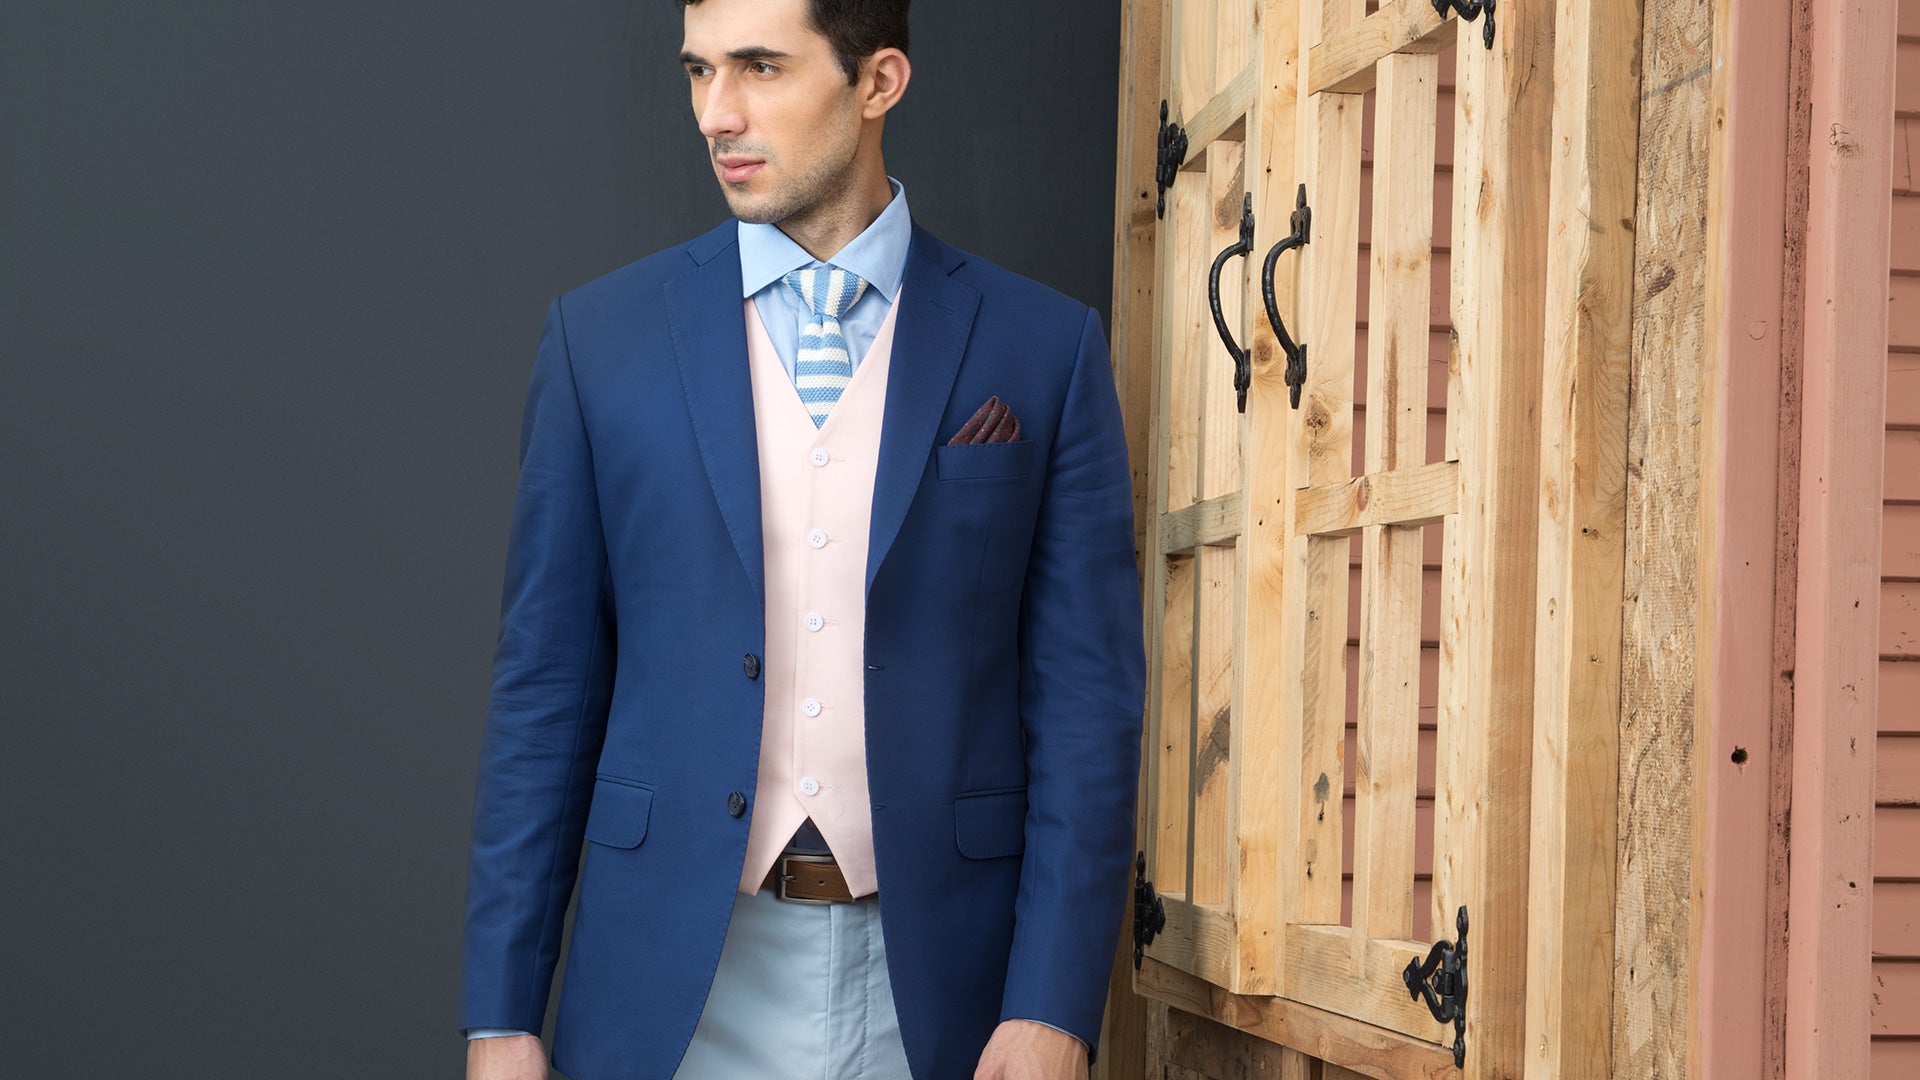 CAN’T TAKE OUR EYES OFF THIS AZURE, DEEP BLUE SINGLE BREASTED COAT PAIRED WITH A PINK WAISTCOAT